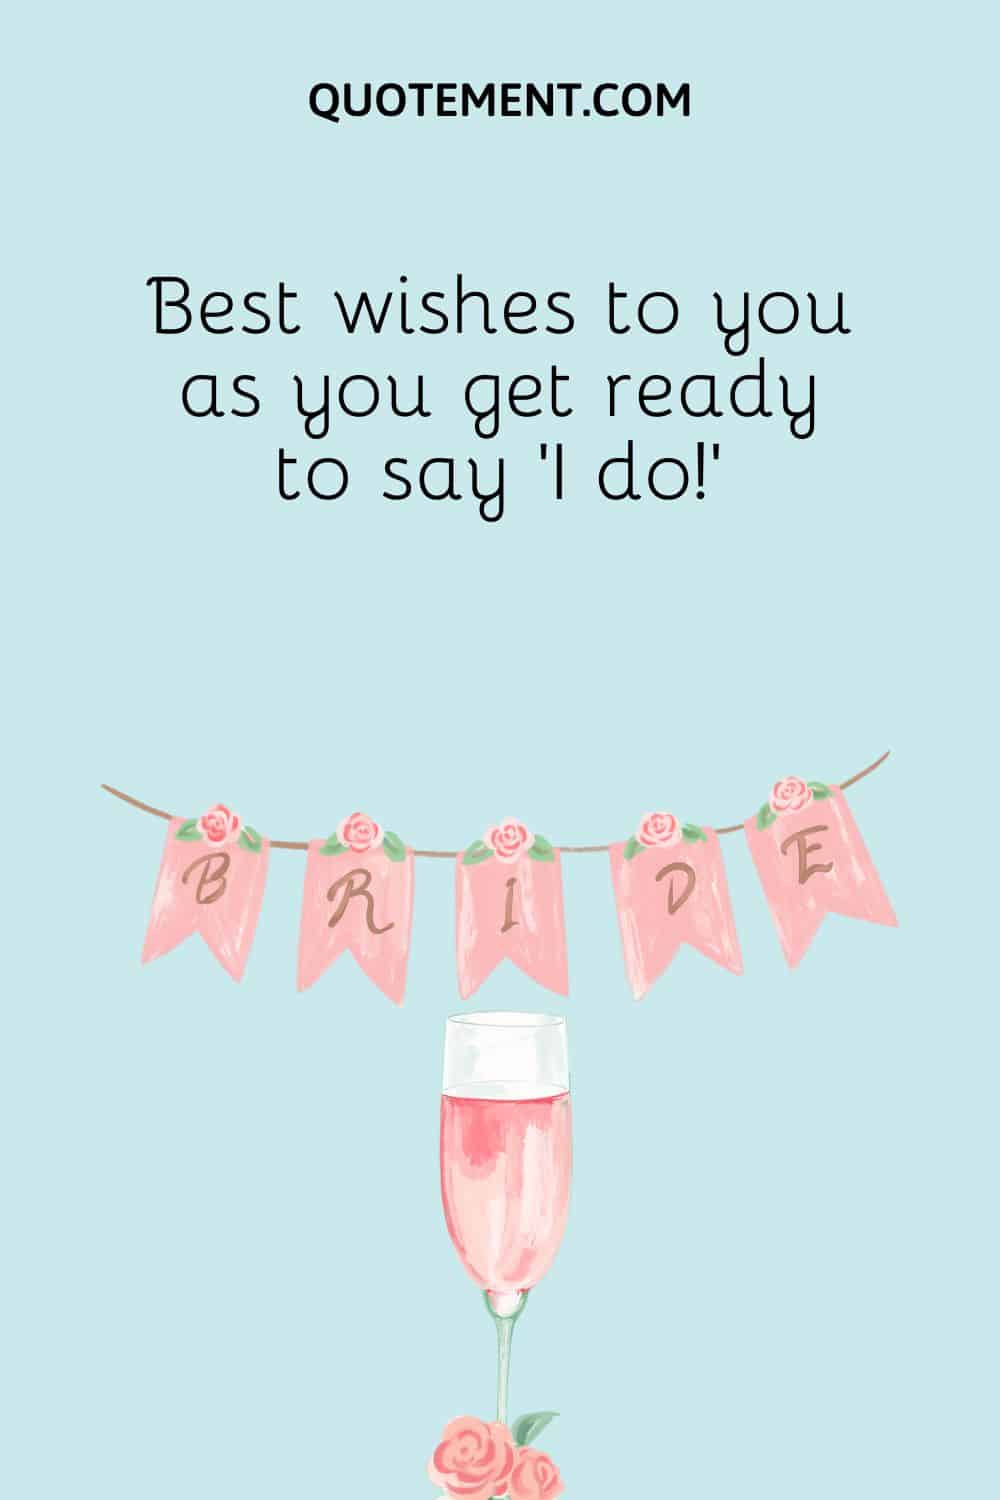 Best wishes to you as you get ready to say 'I do!'